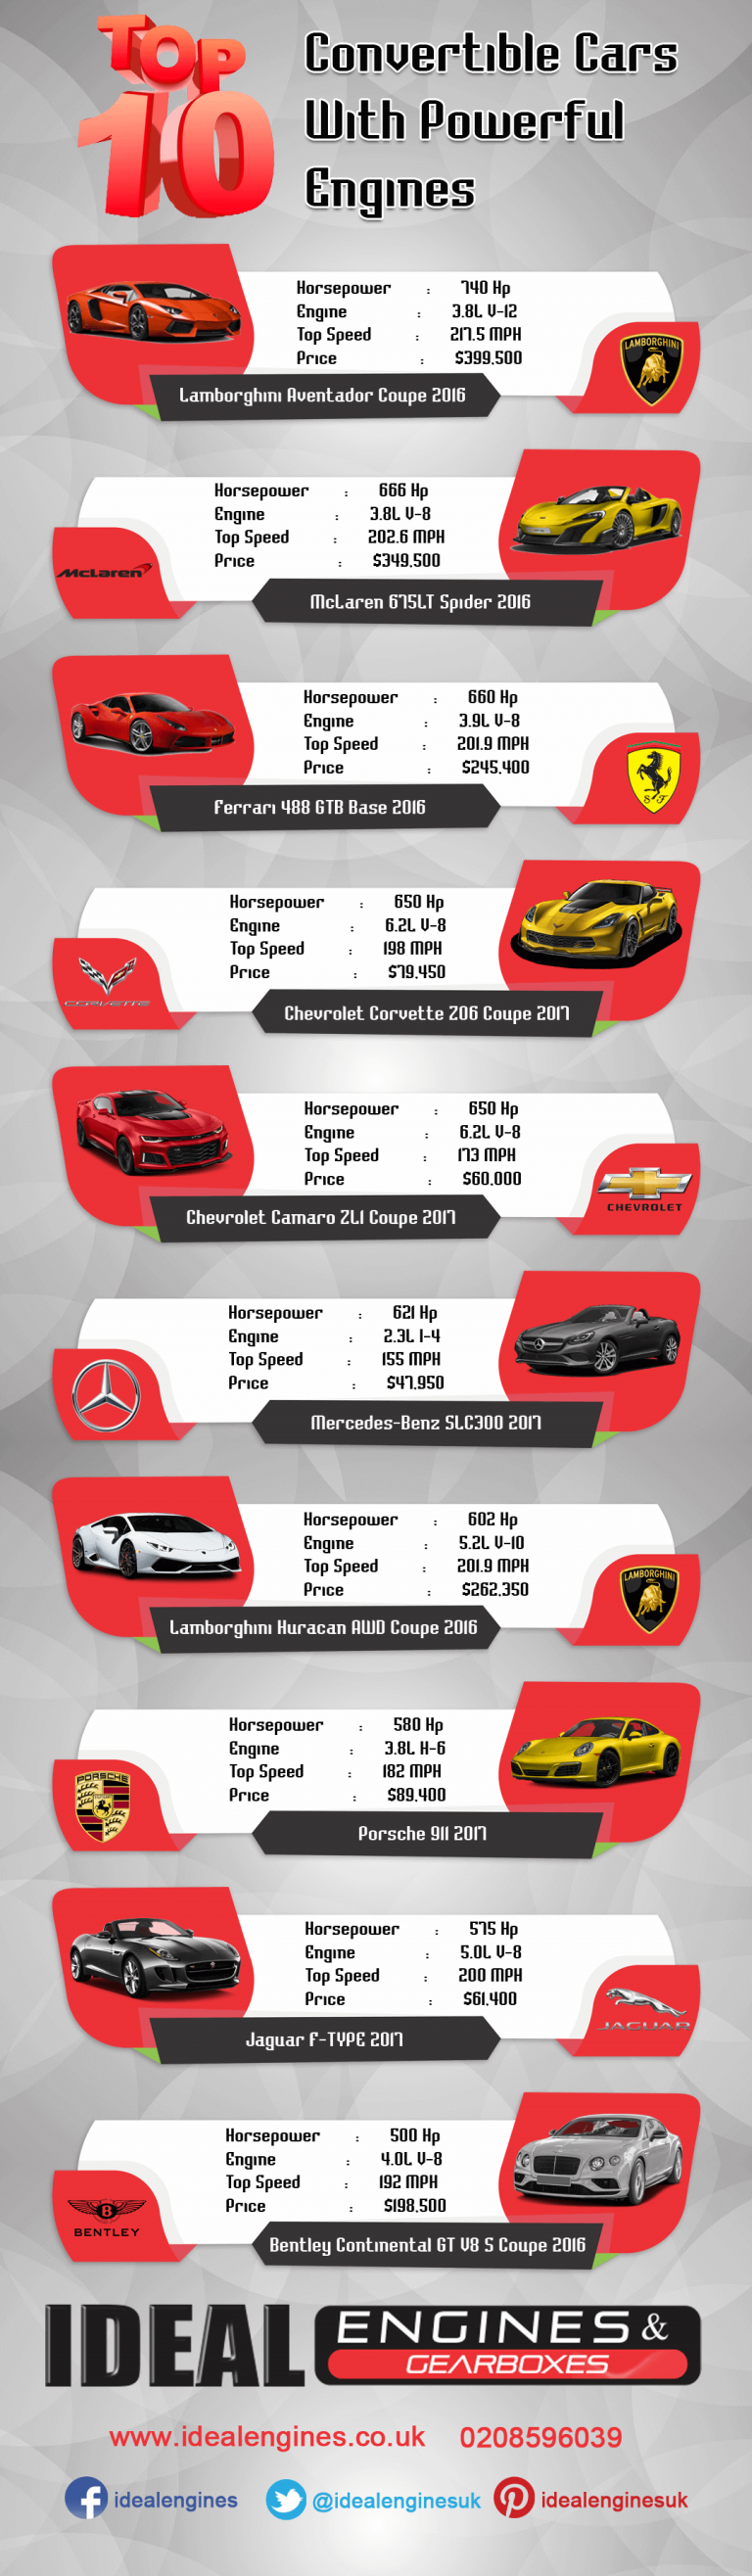 Top Ten Convertible Cars With Powerful Engines | Infographic Portal